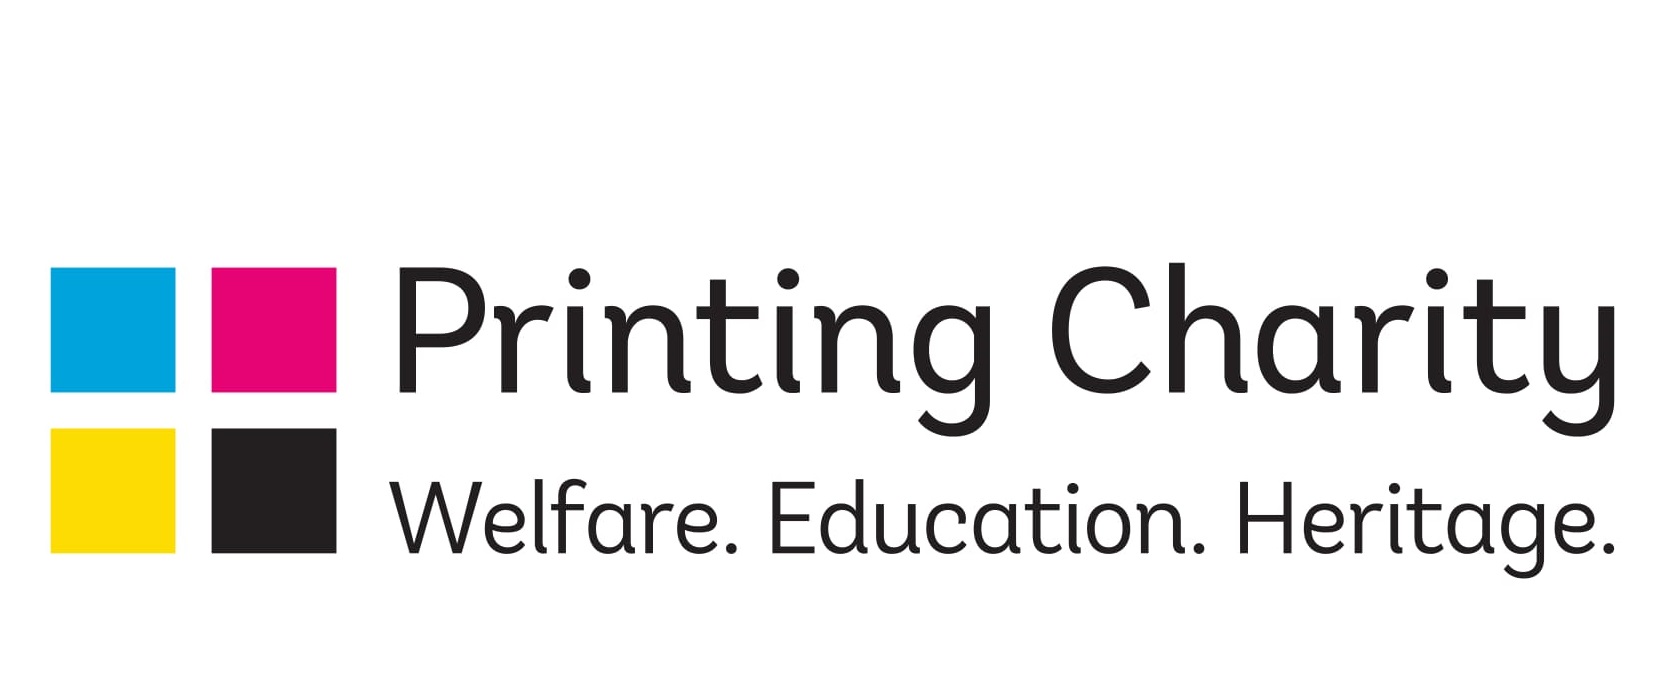 The Printing Charity appoints three new trustees